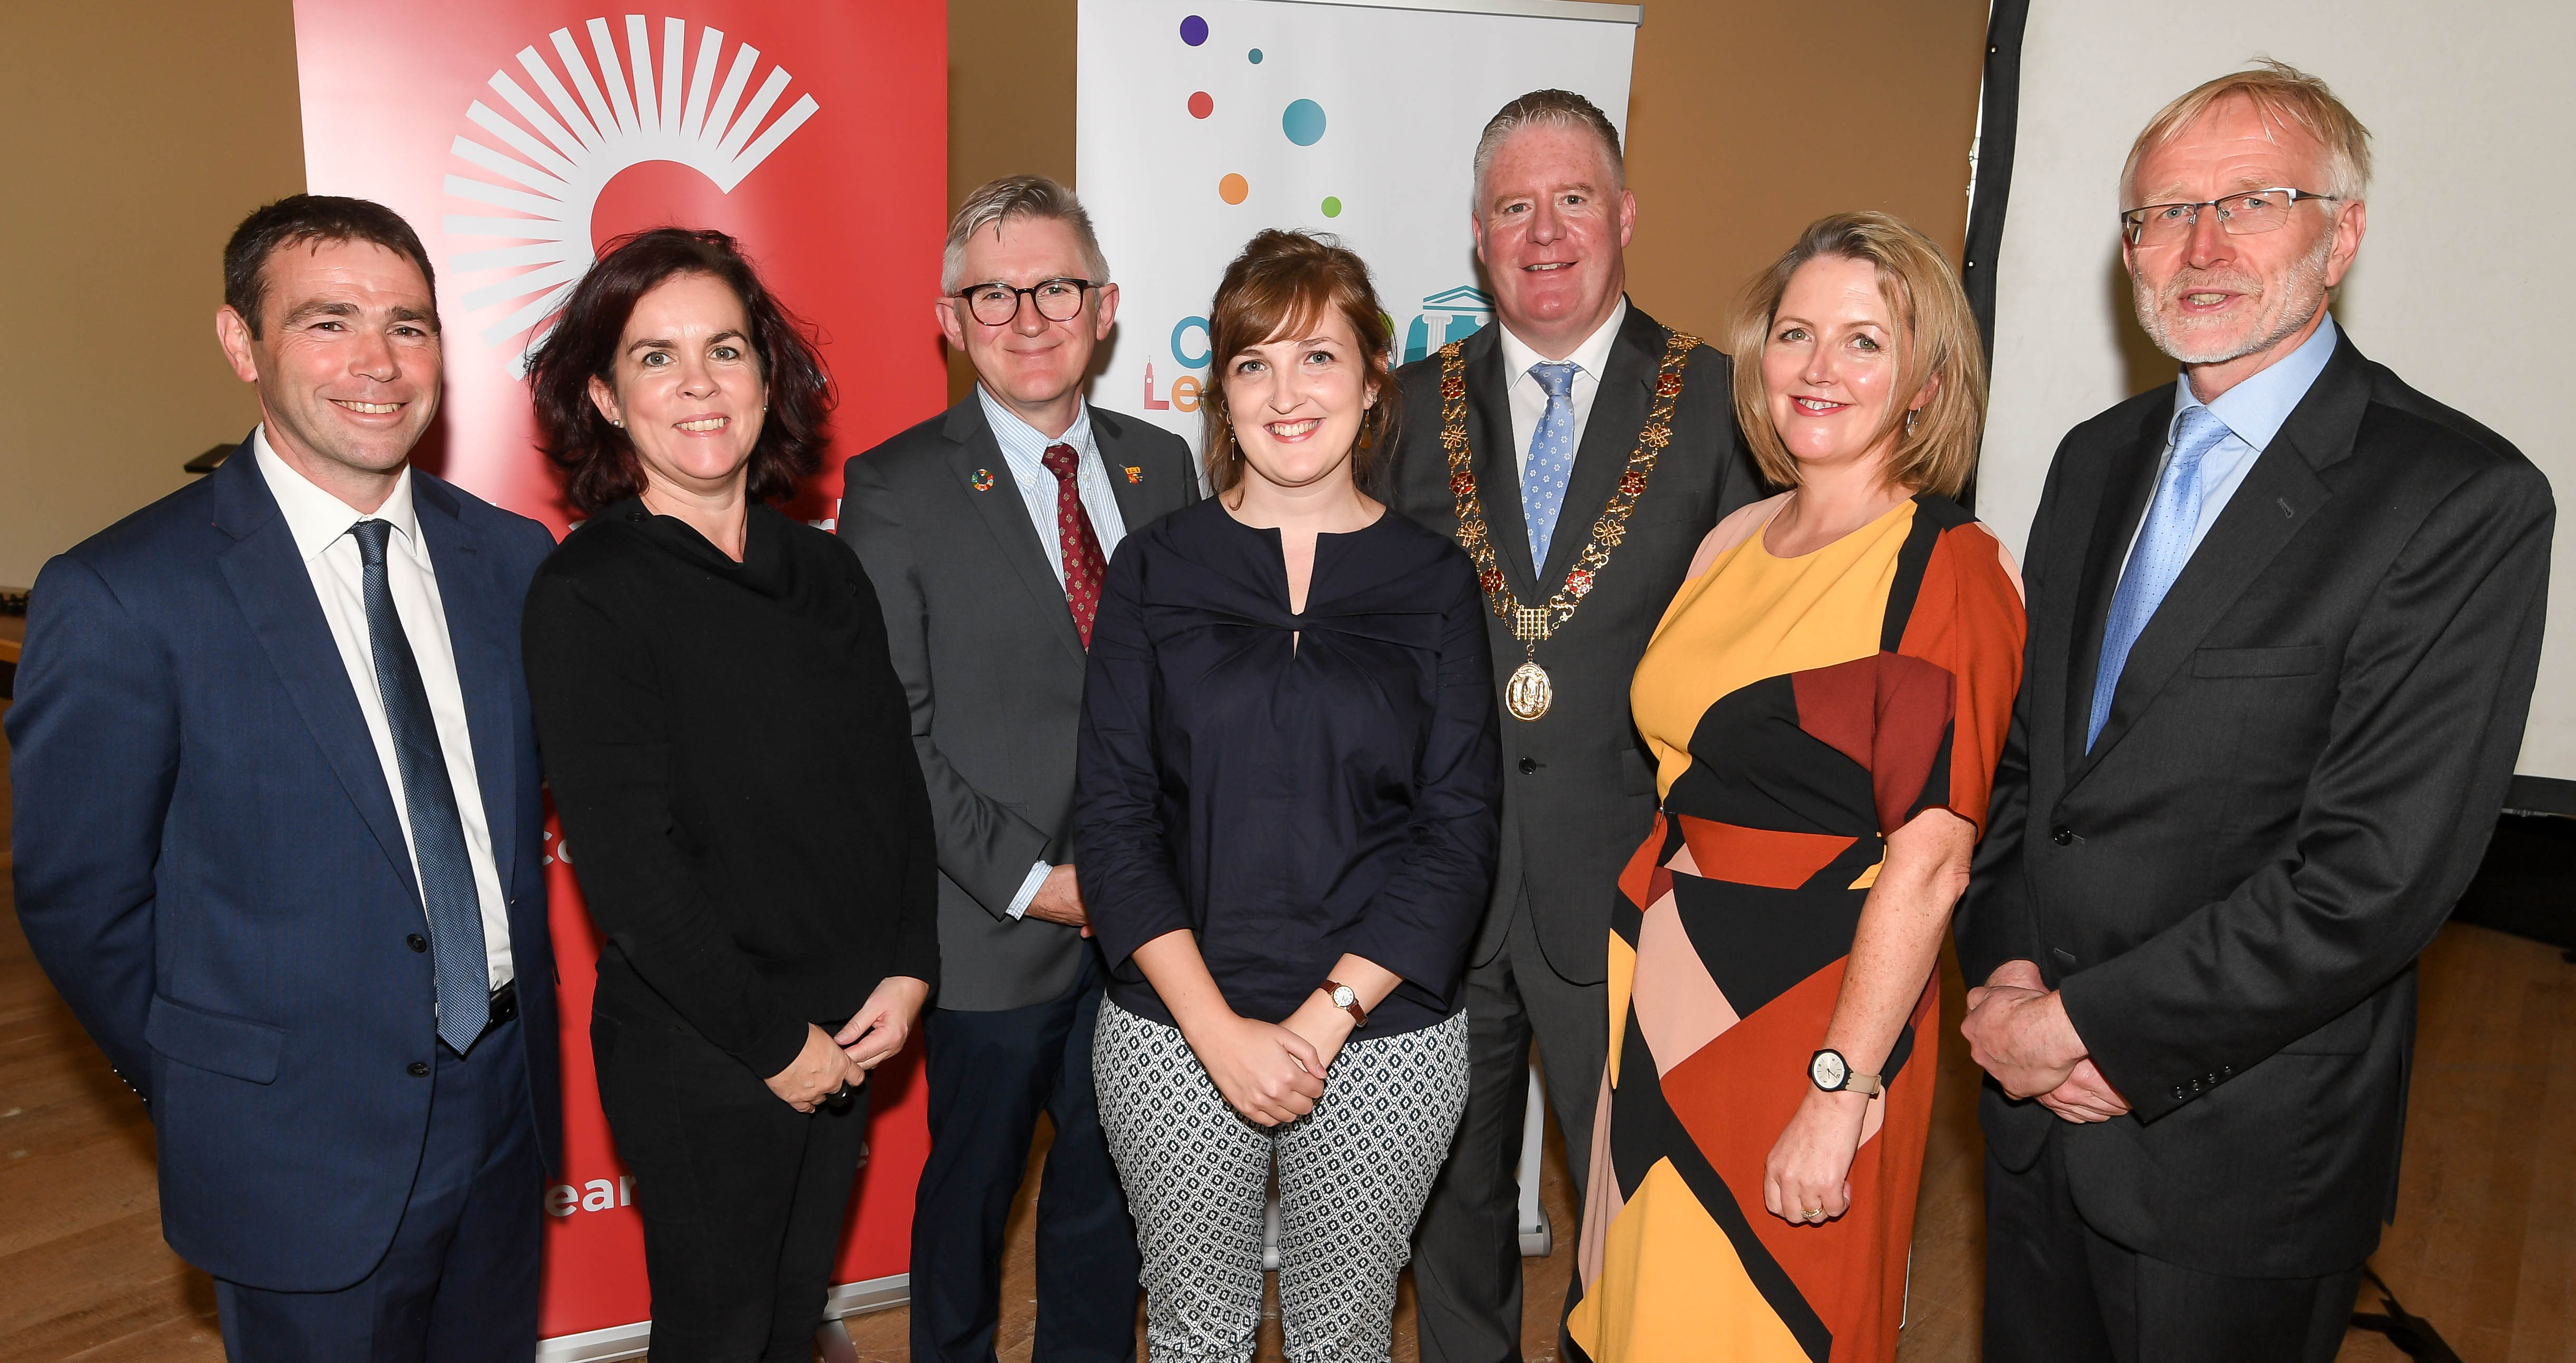 UCC celebrates launch of UNESCO Institute of Lifelong Learning